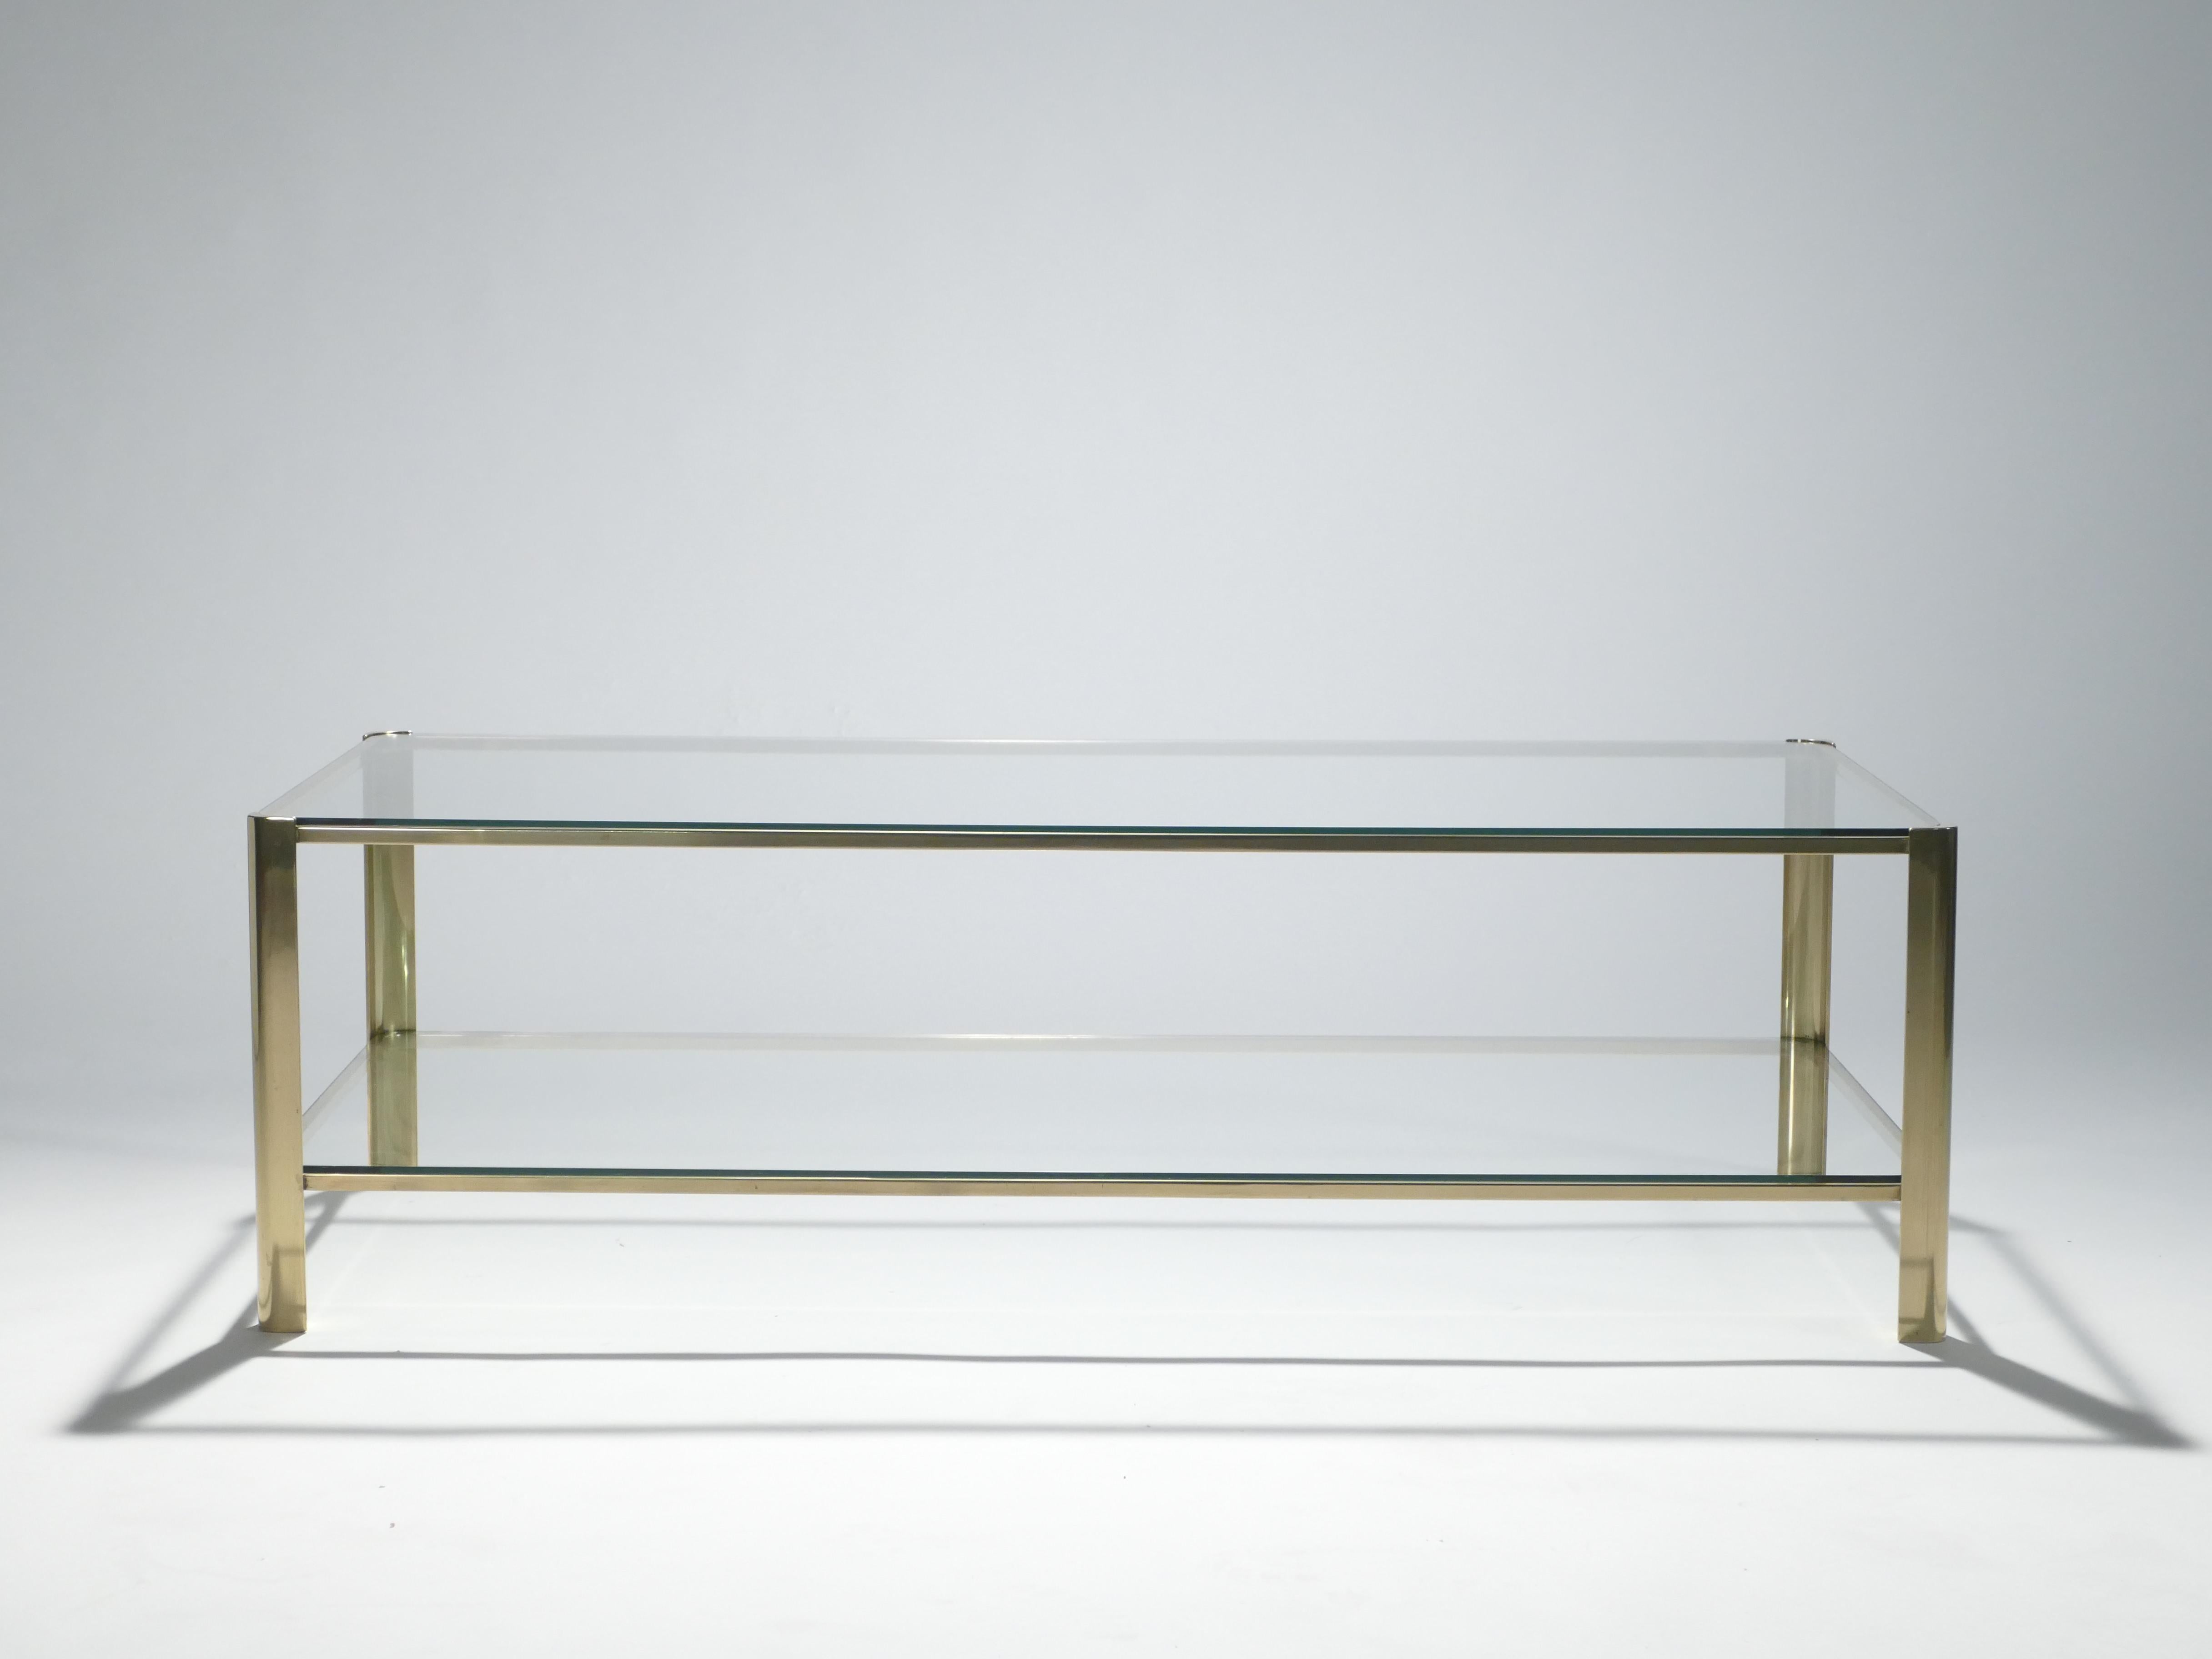 This coffee table signed by Jacques Quinet and stamped by Broncz, is a remarkable find. It features a strong, bronze base constructed to last. The 2/3 glass top adds extra storage space as well as aesthetic appeal. This coffee table will not only be